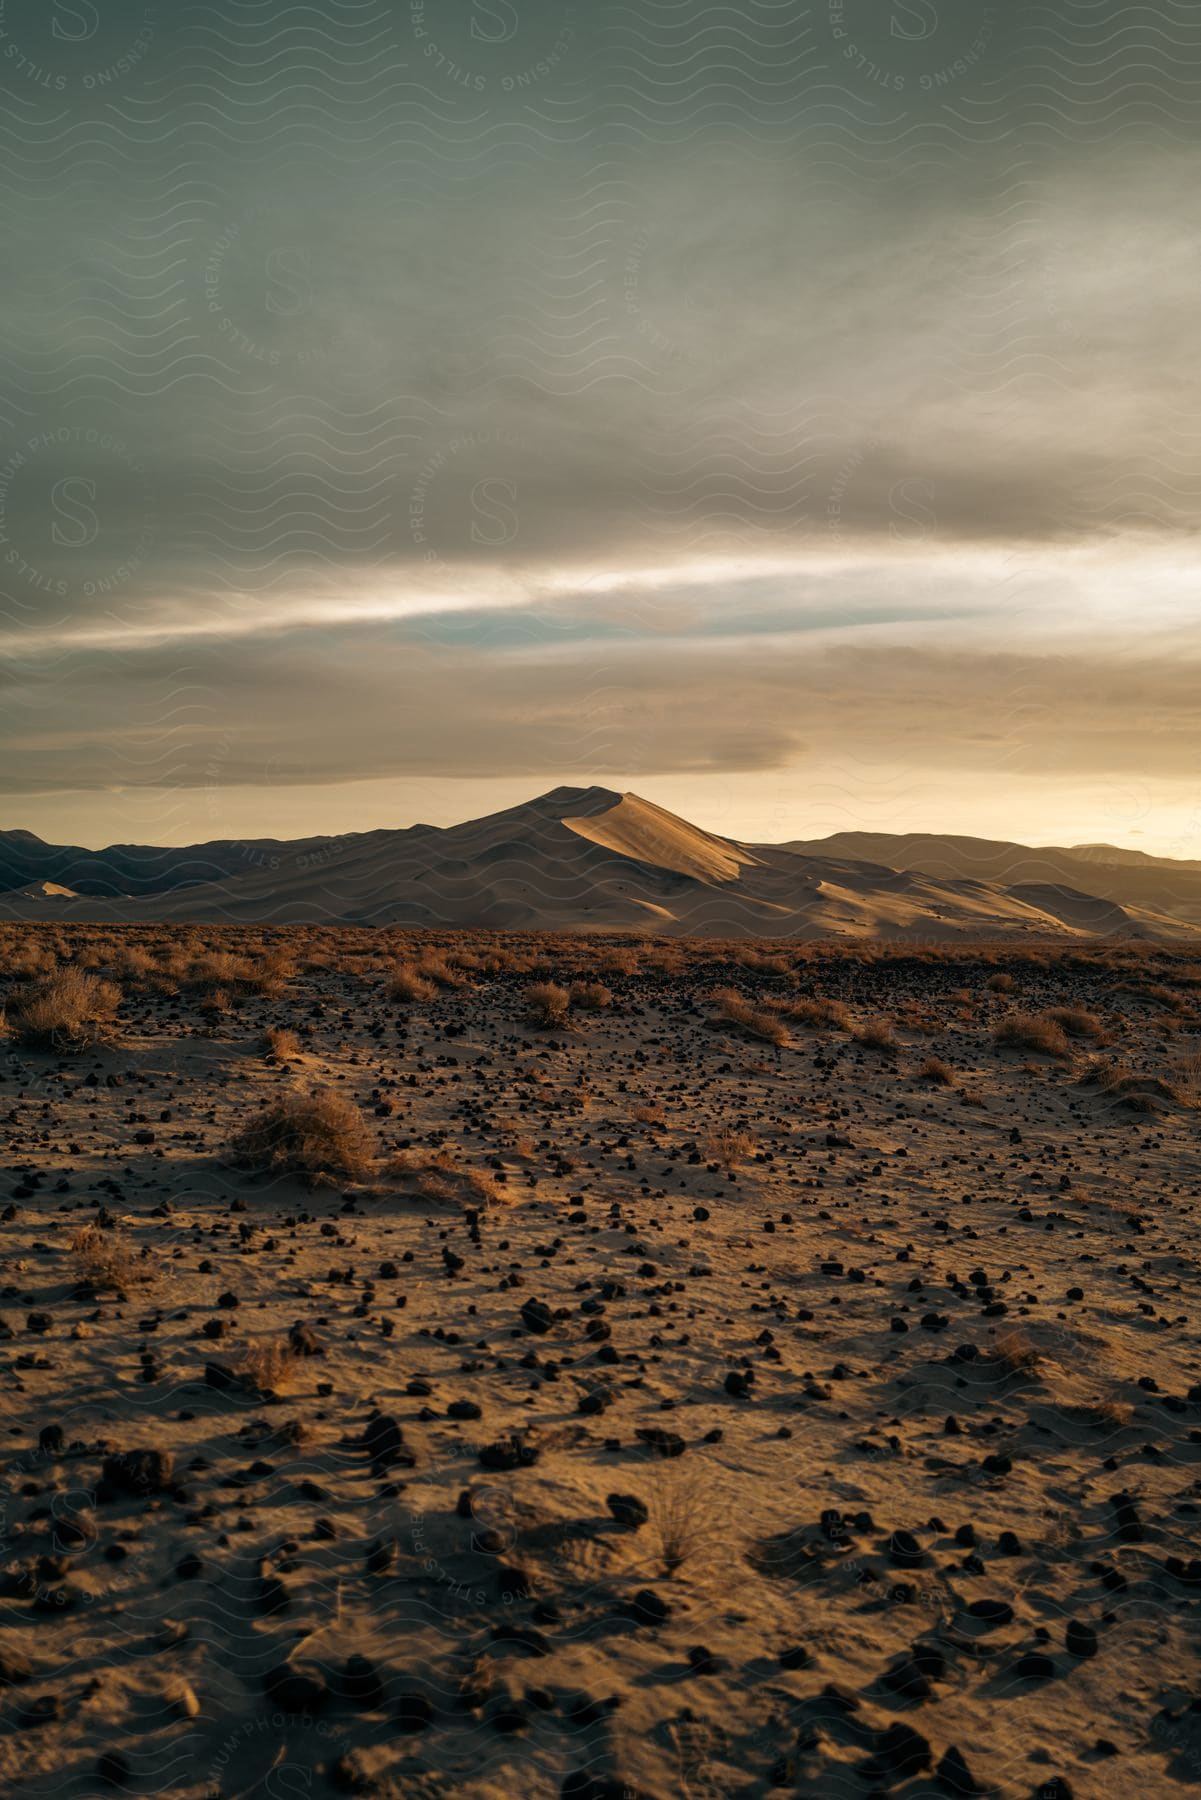 Desert landscape with scattered plants and mountains under a cloudy sky